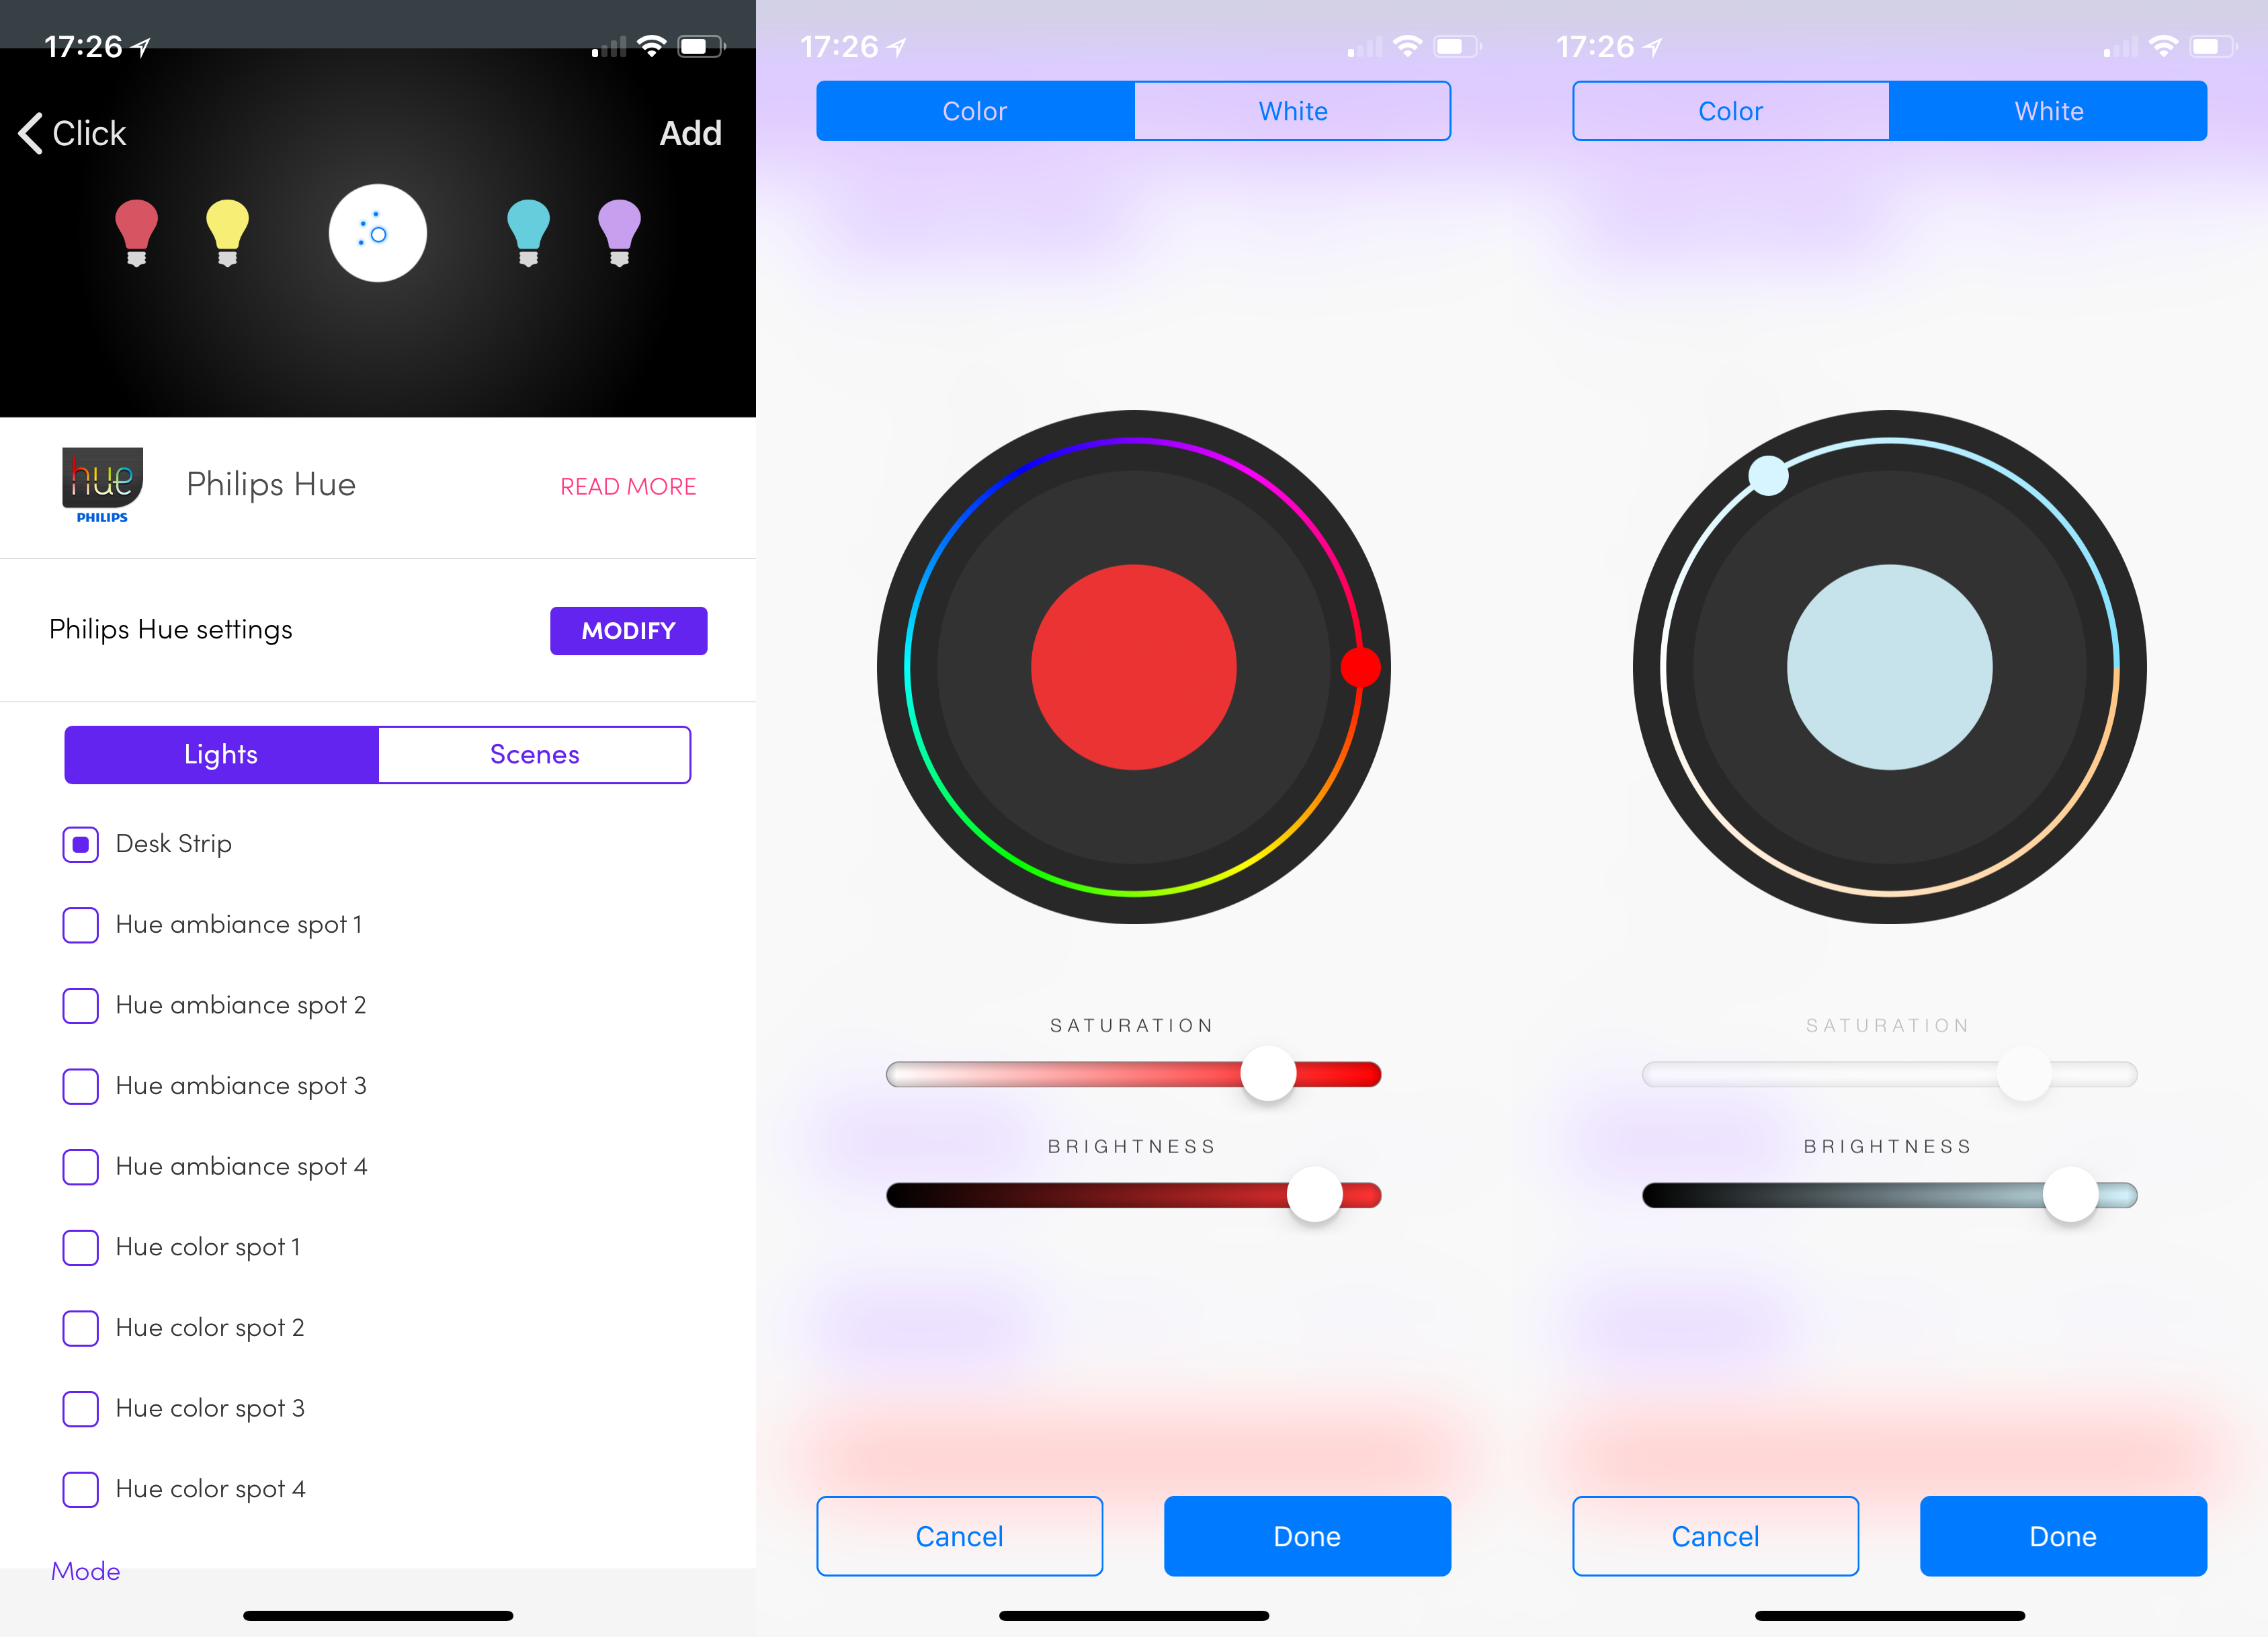 Smart lighting app interface with color and brightness controls.